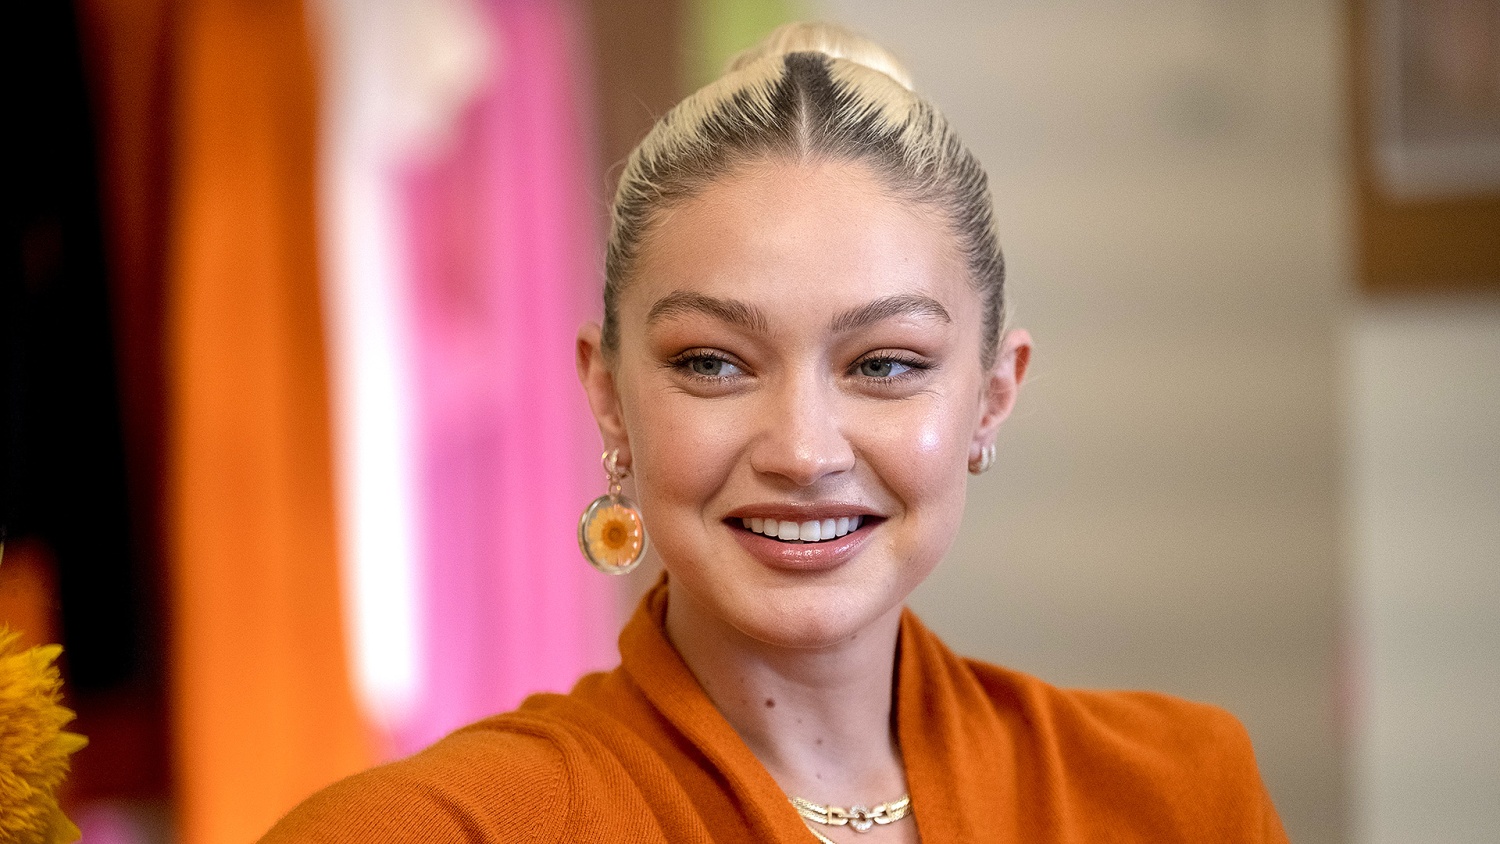 Gigi Hadid Tells All About Her New Clothing Brand, Guest in Residence